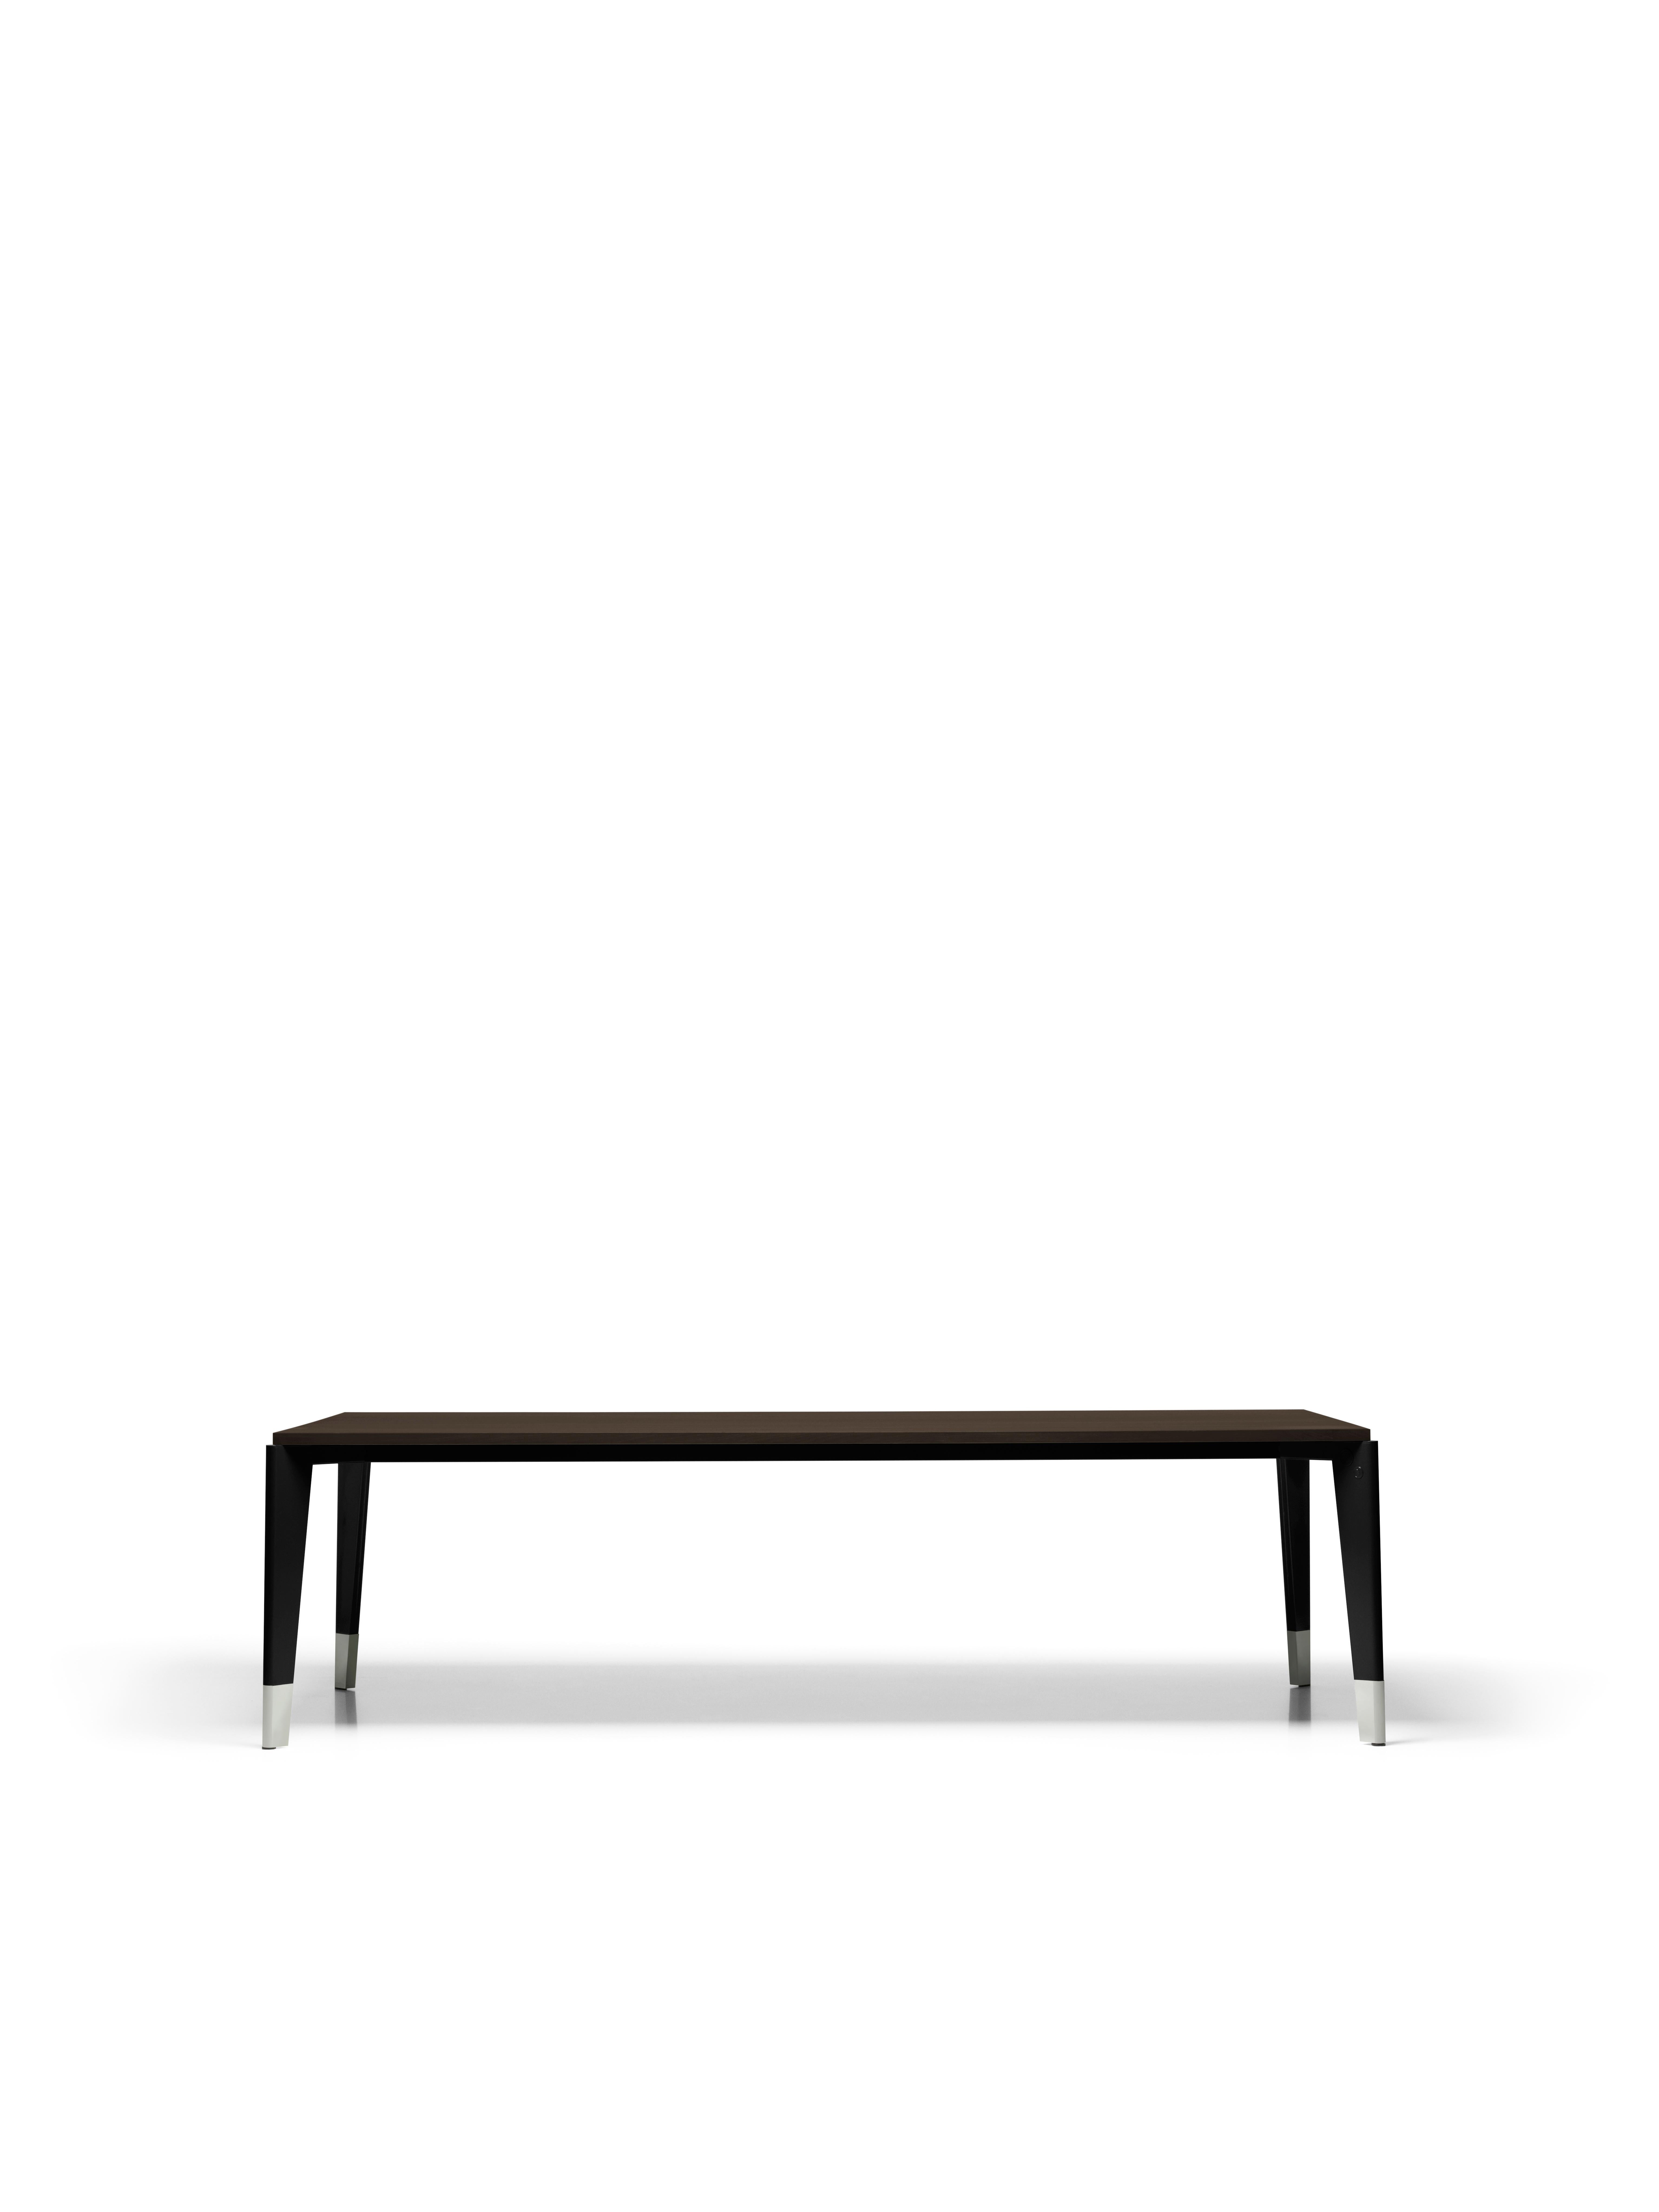 Swiss Vitra Flavigny Table in Natural Oak by Jean Prouvé